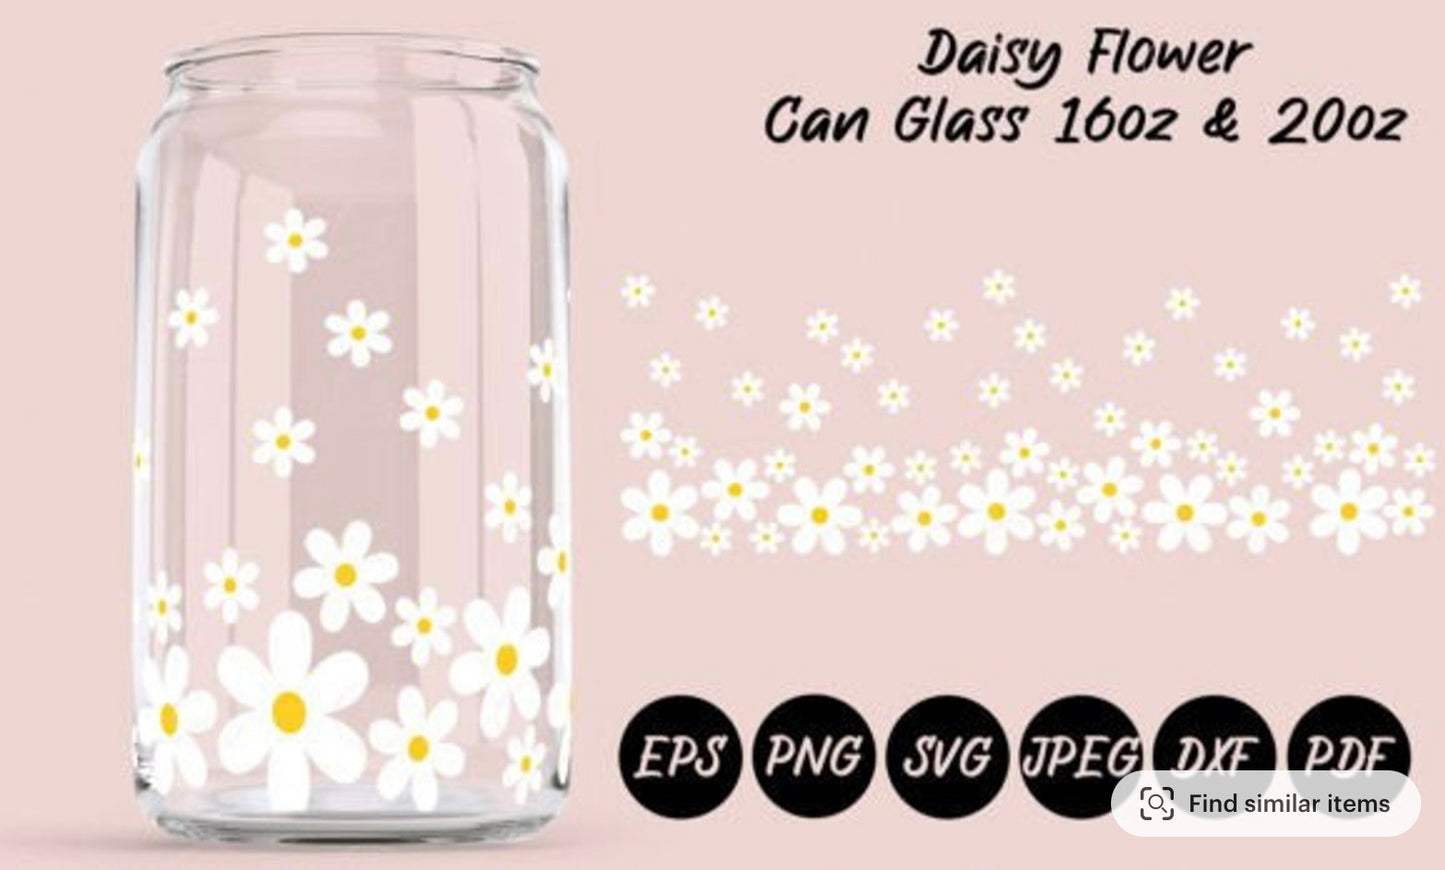 Floating daisies glass cup